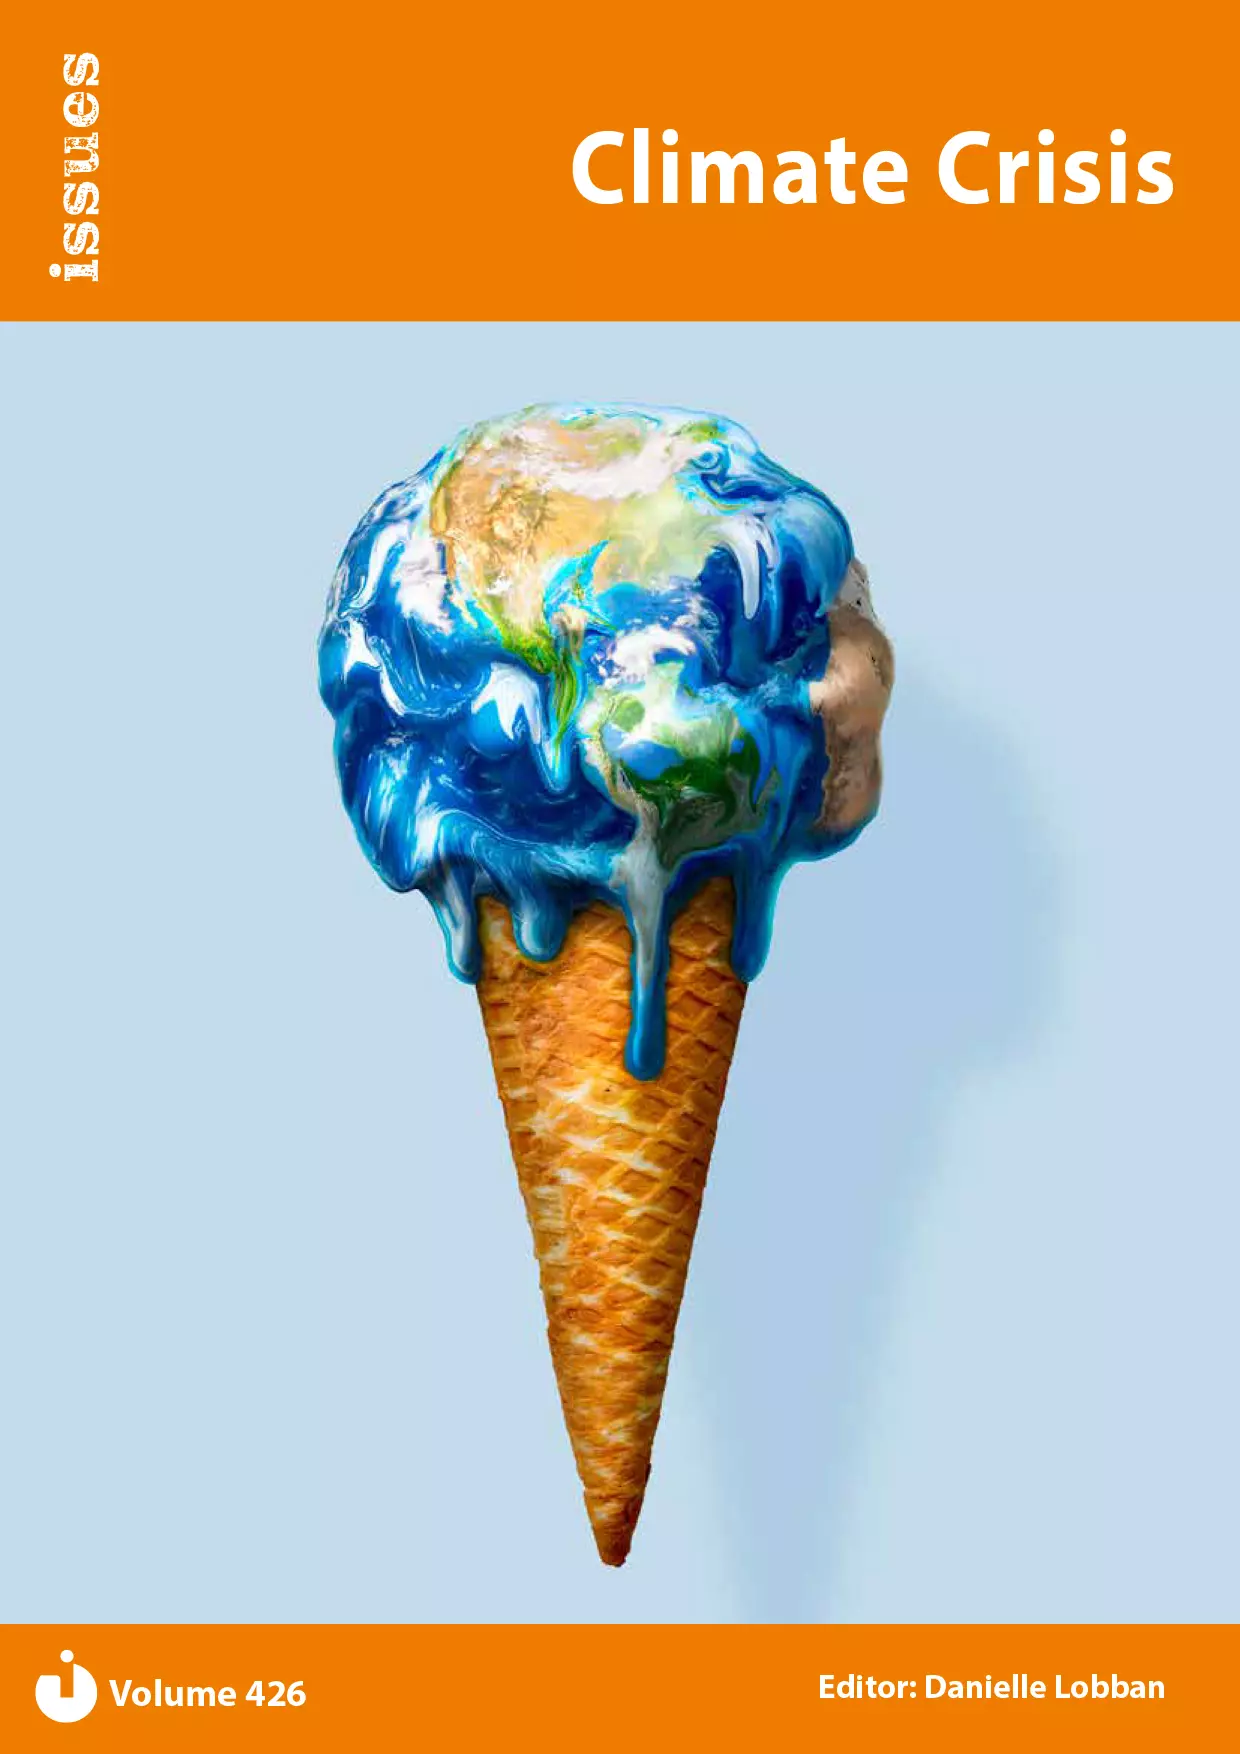 Climate change and global warming have led to a climate crisis. This book explores the causes, the i...